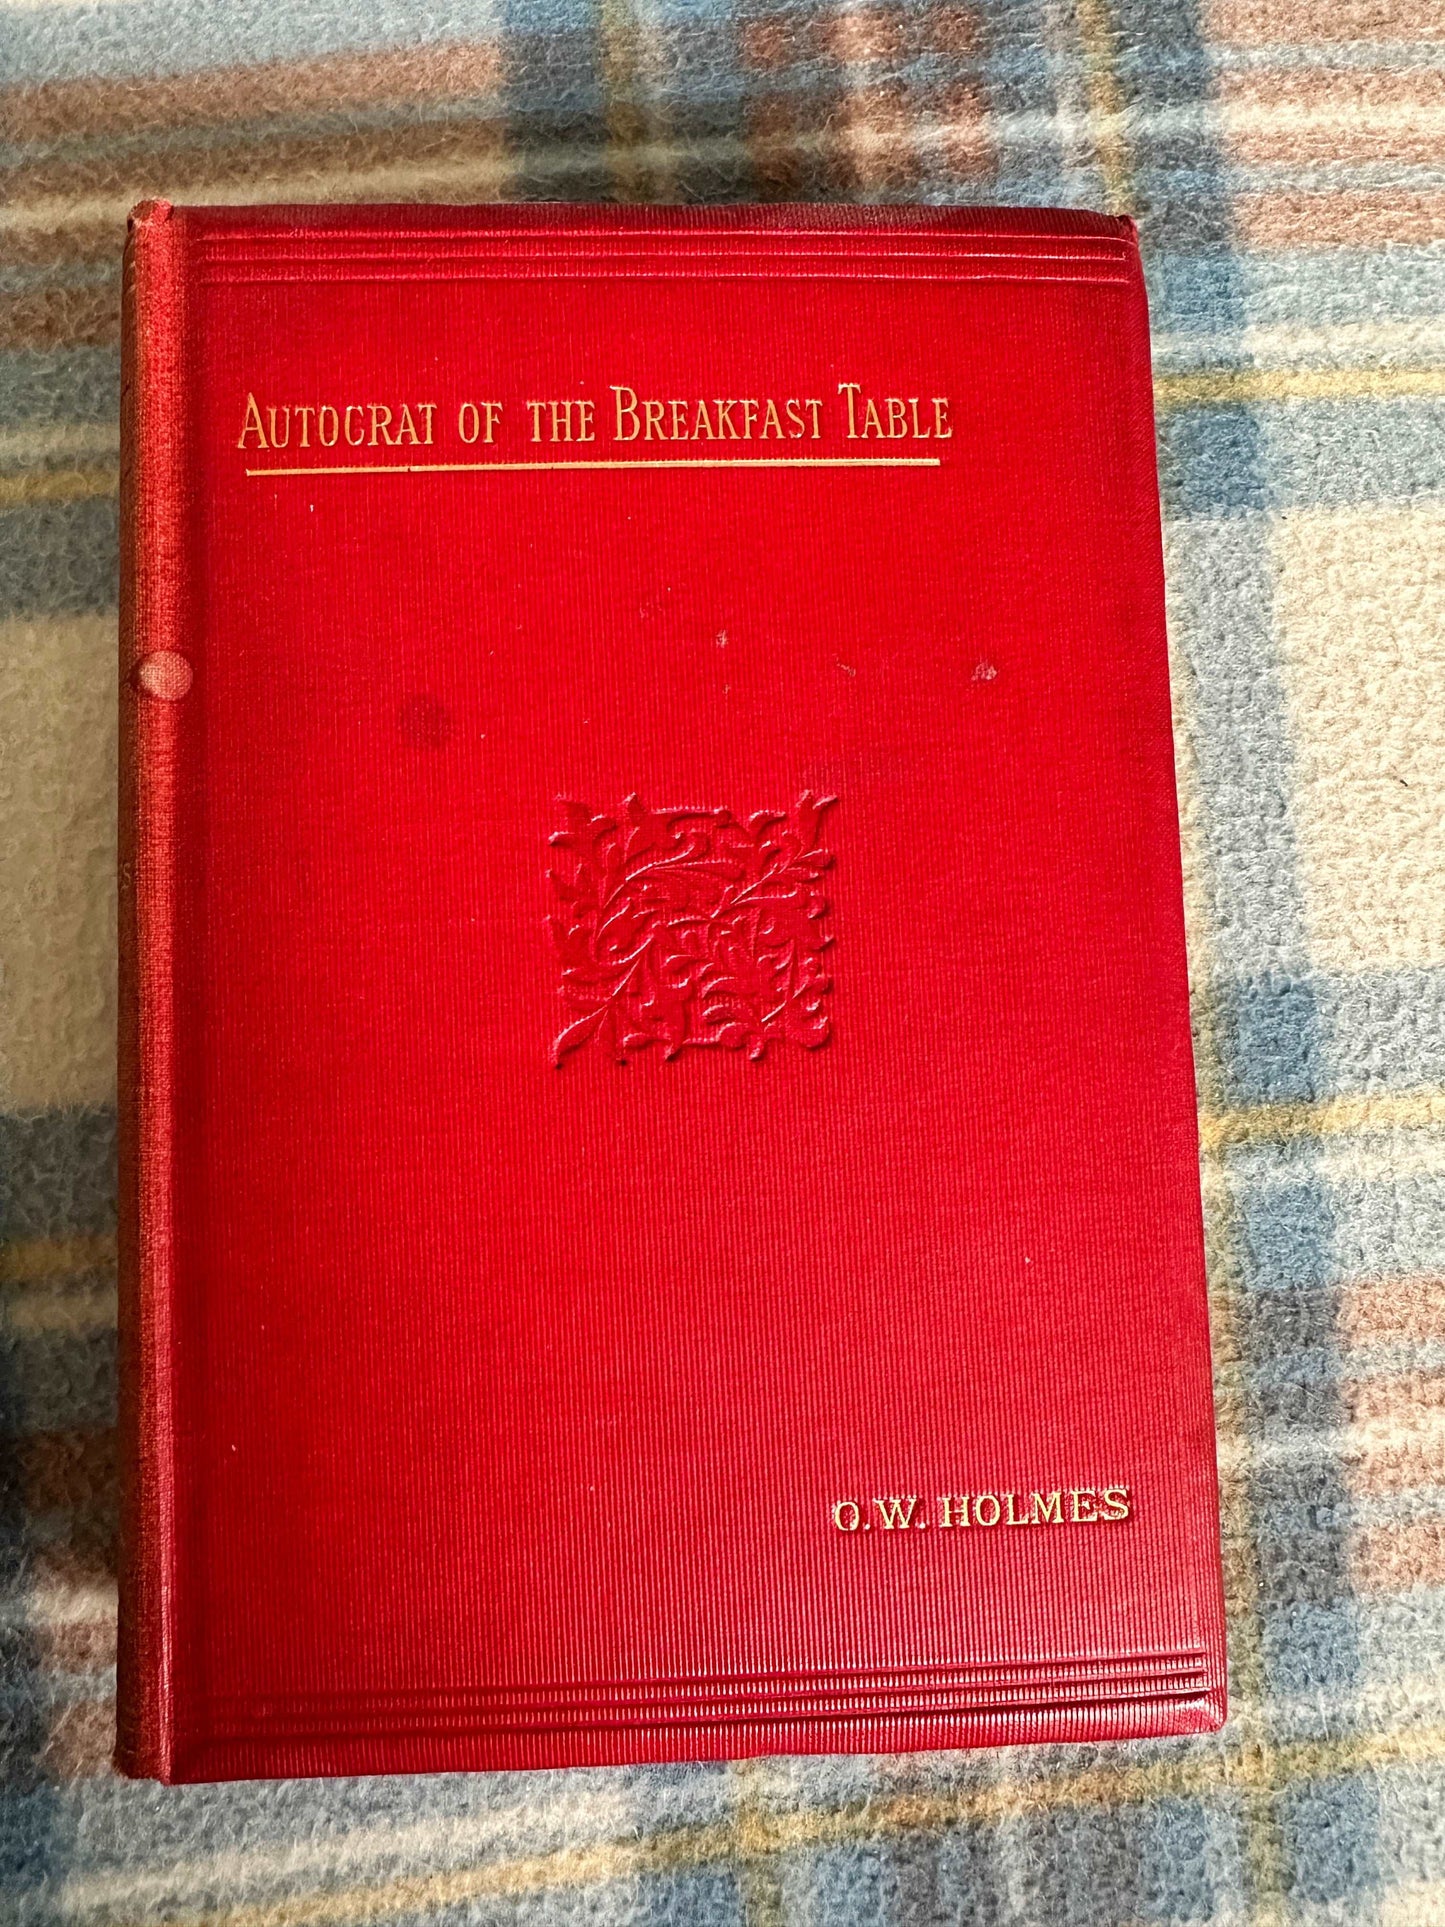 1896 The Autocrat Of The Breakfast Table - Oliver Wendell Holmes( The Grand Colosseum Warehouse Co)